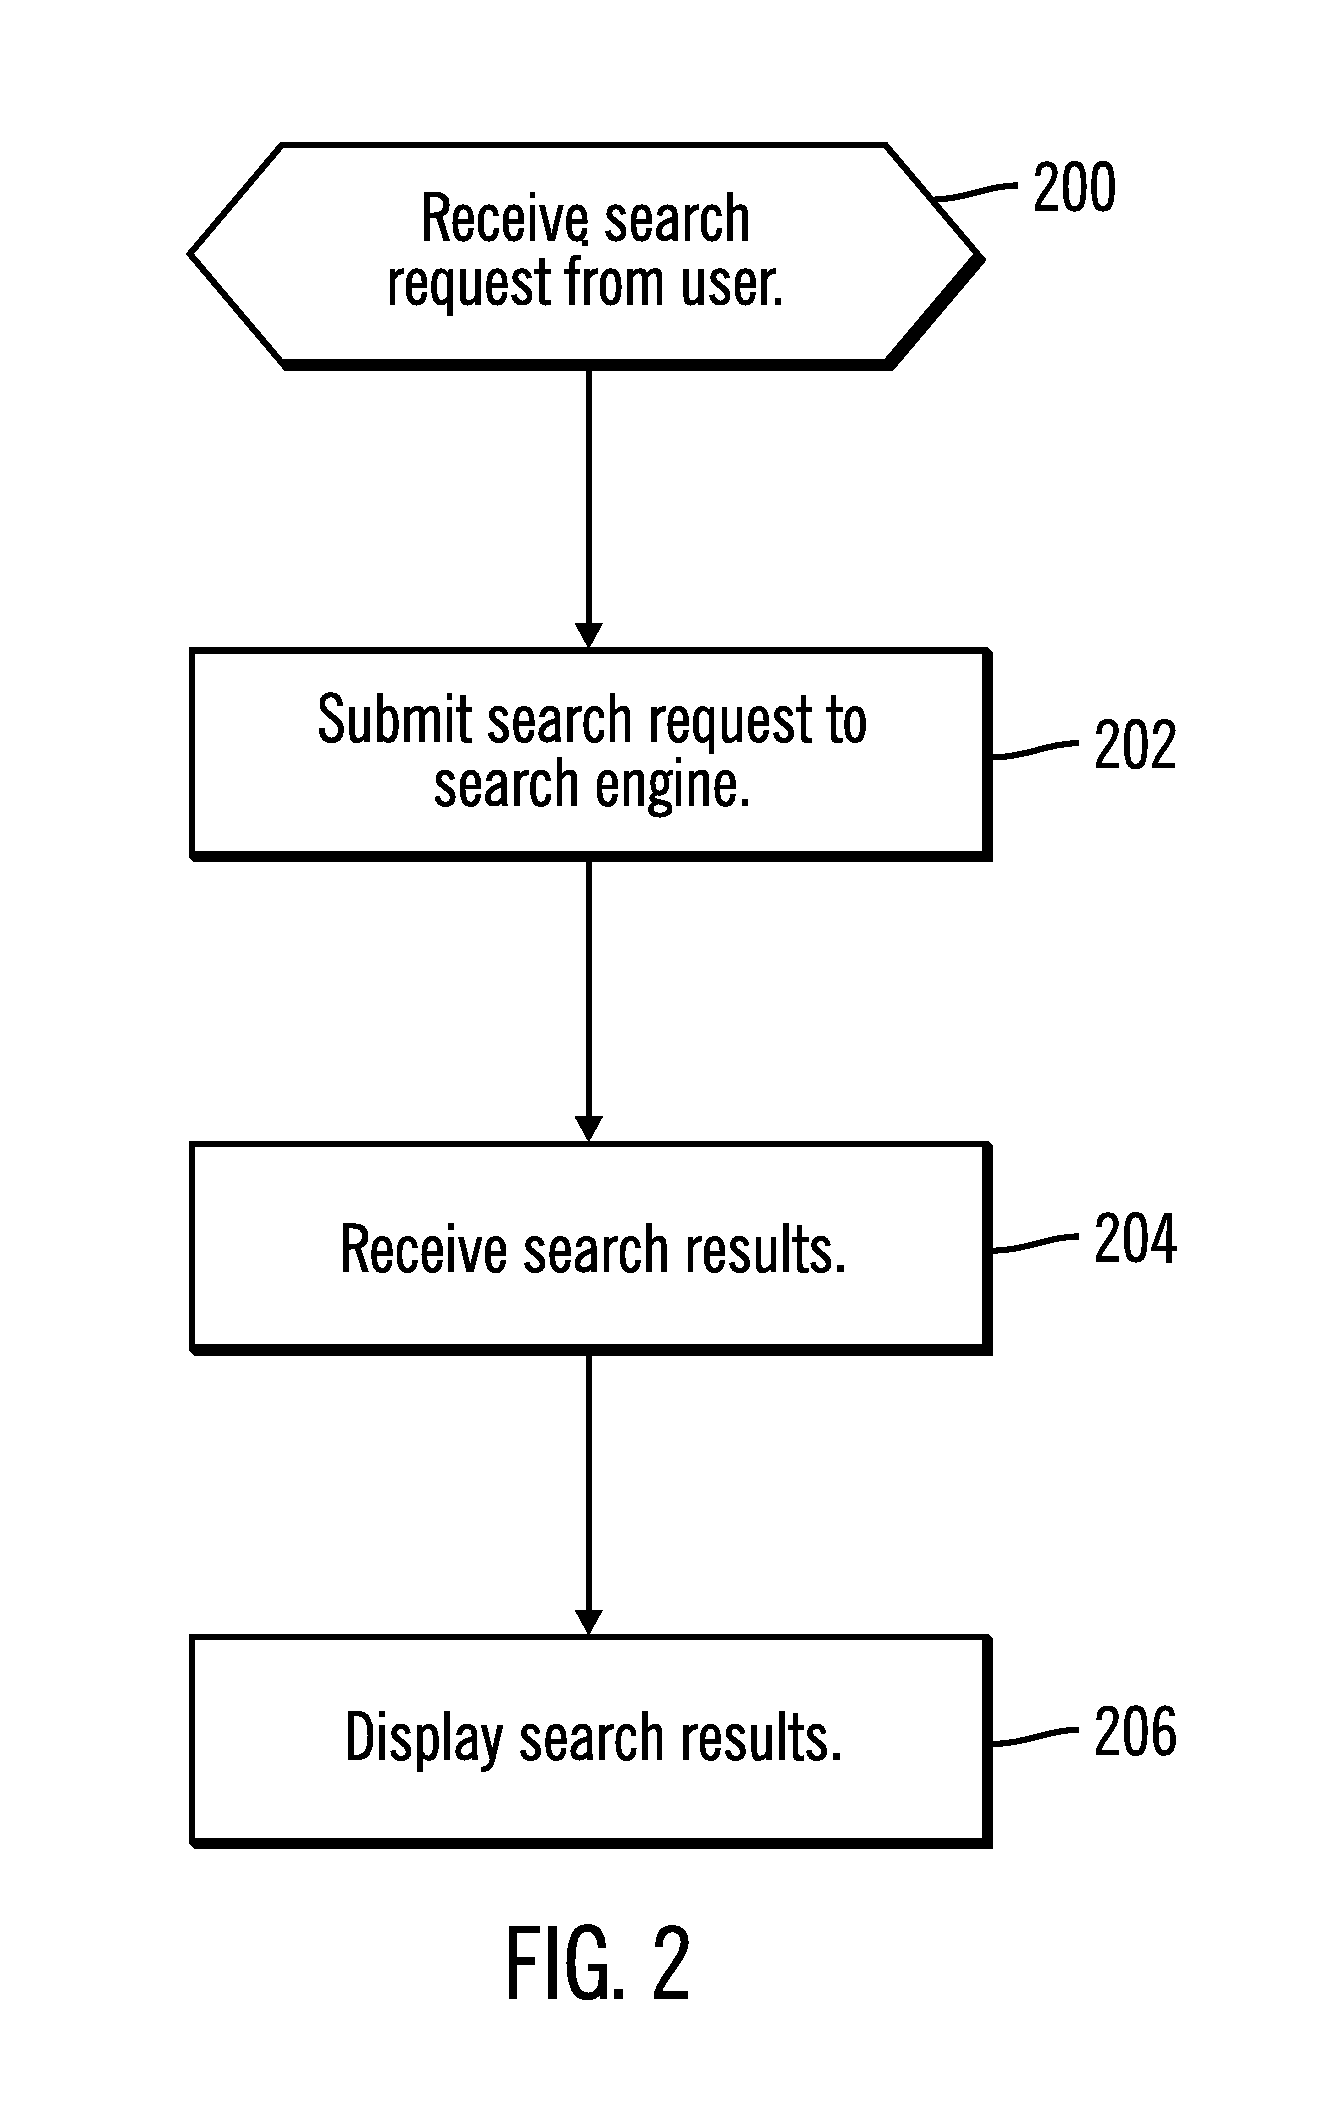 Iterative refinement of search results based on user feedback